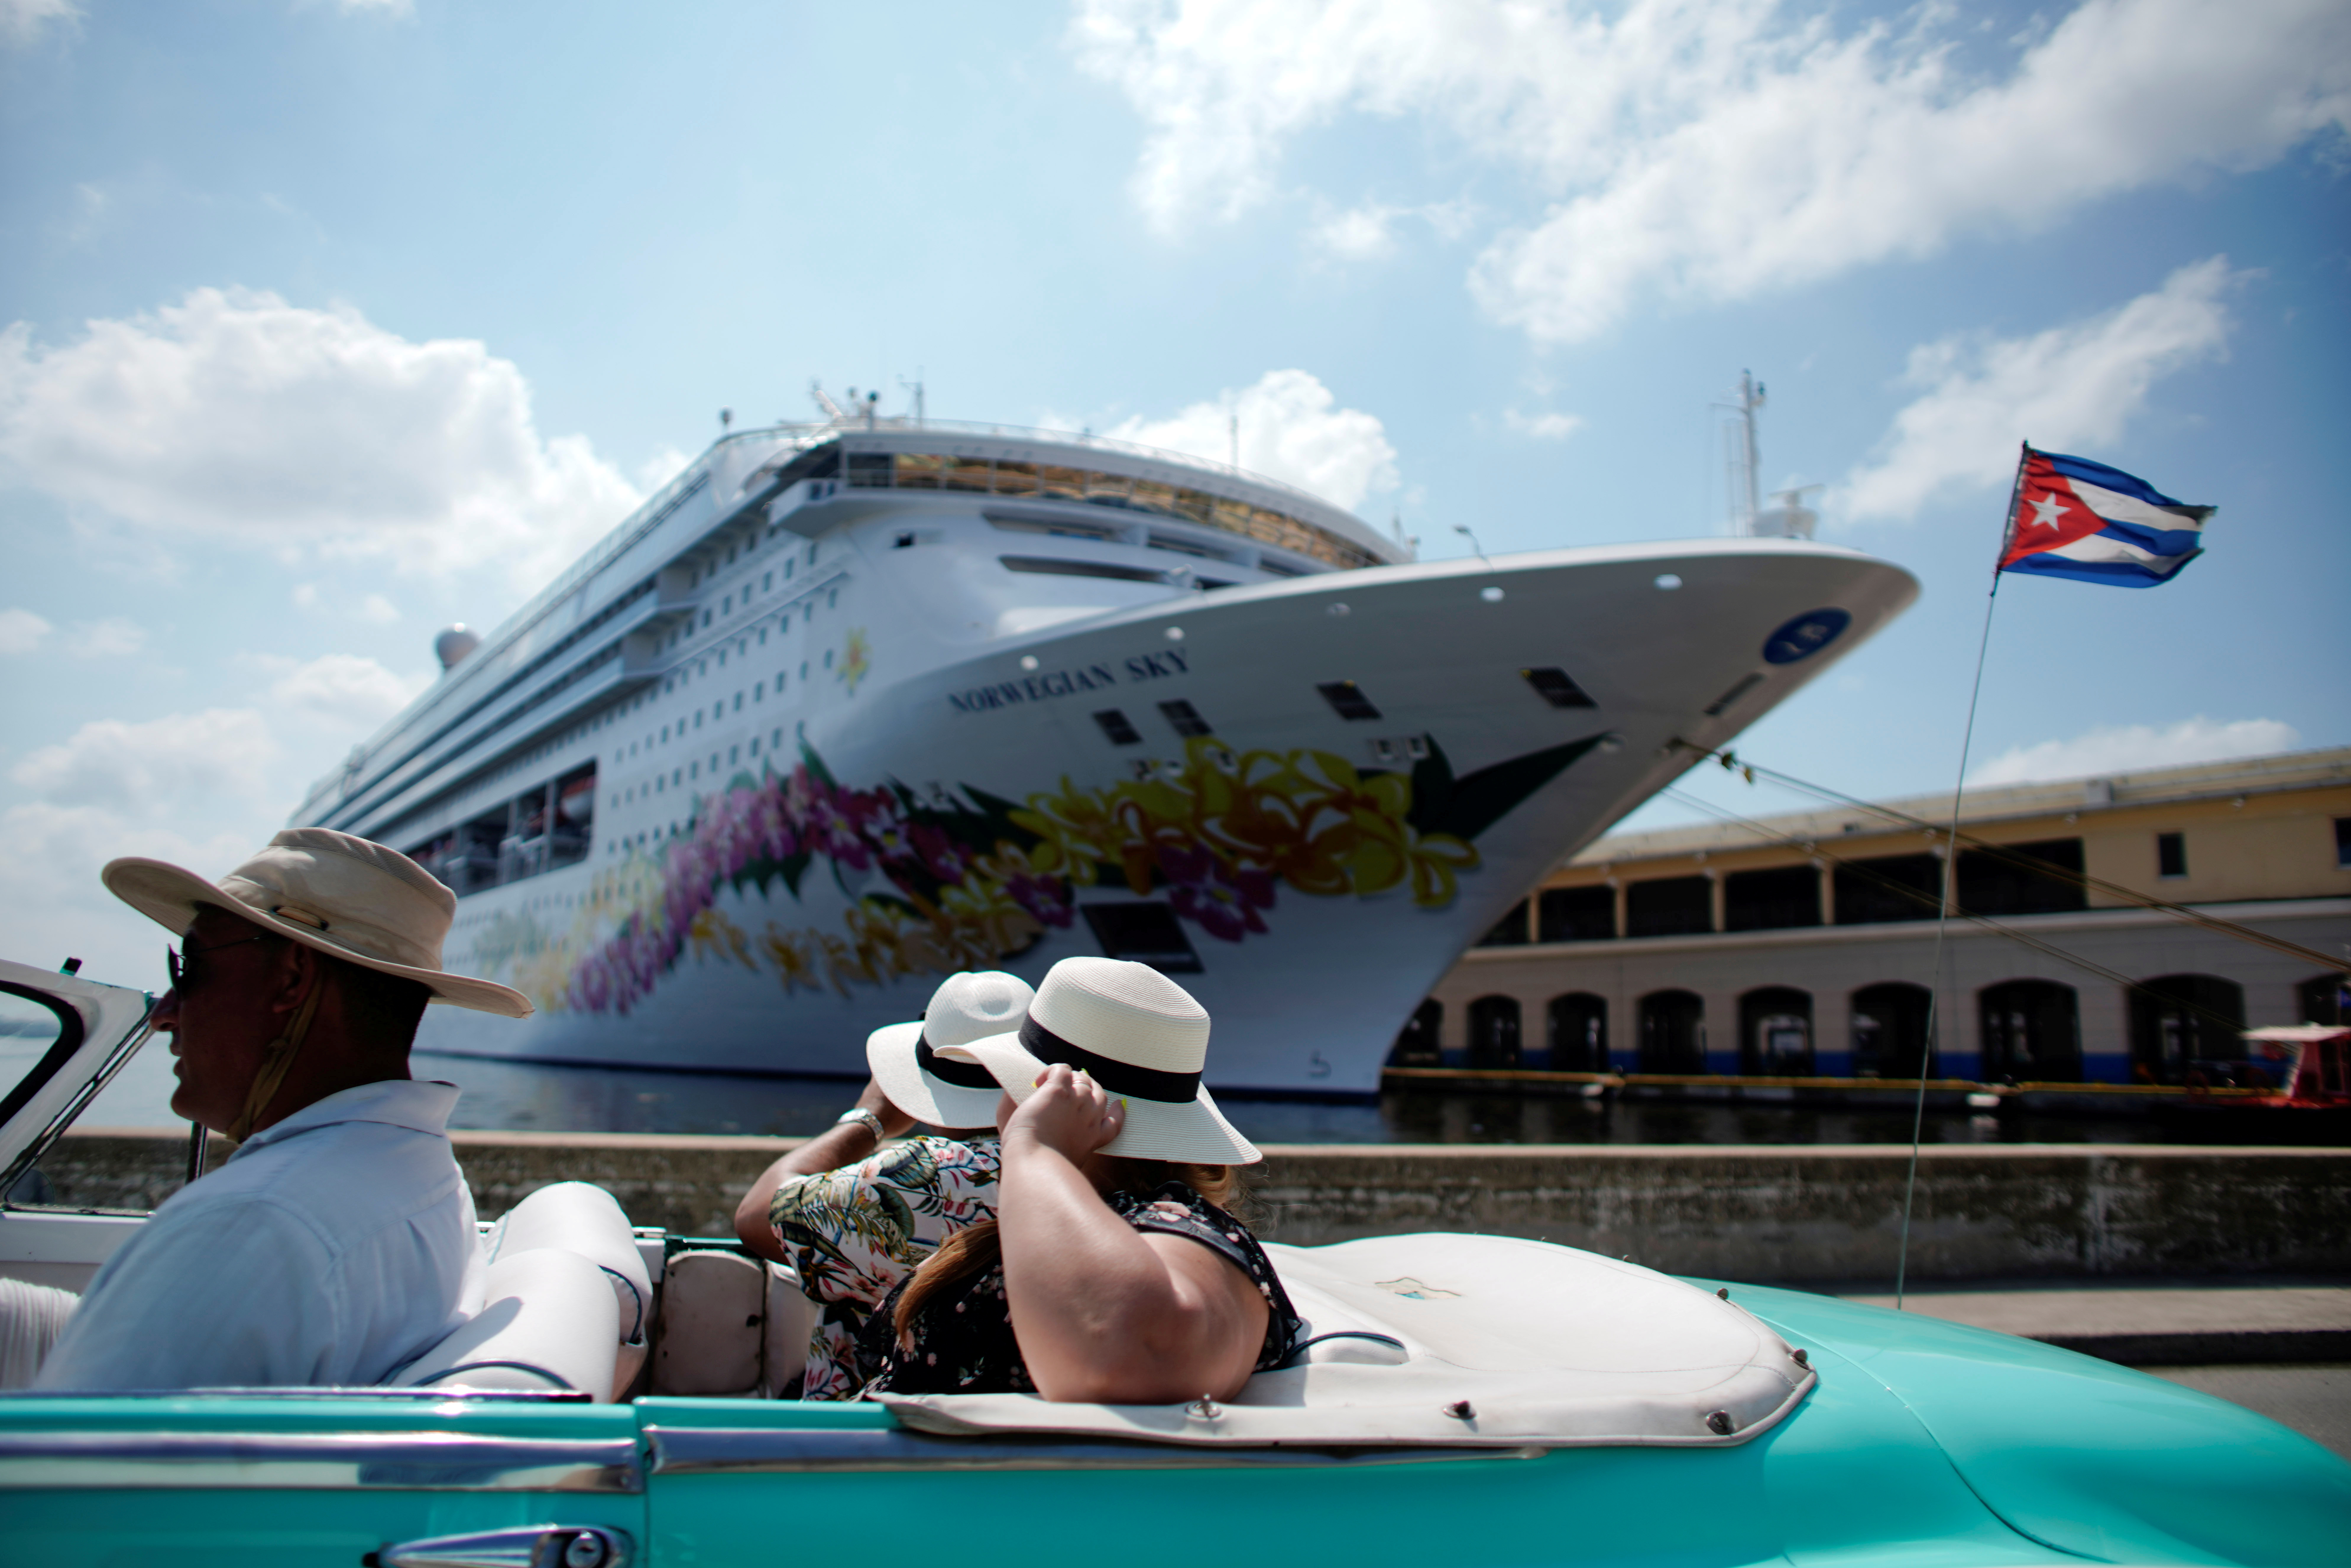 Tourists ride inside a vintage car as they pass by the Norwegian Sky cruise ship in Havana